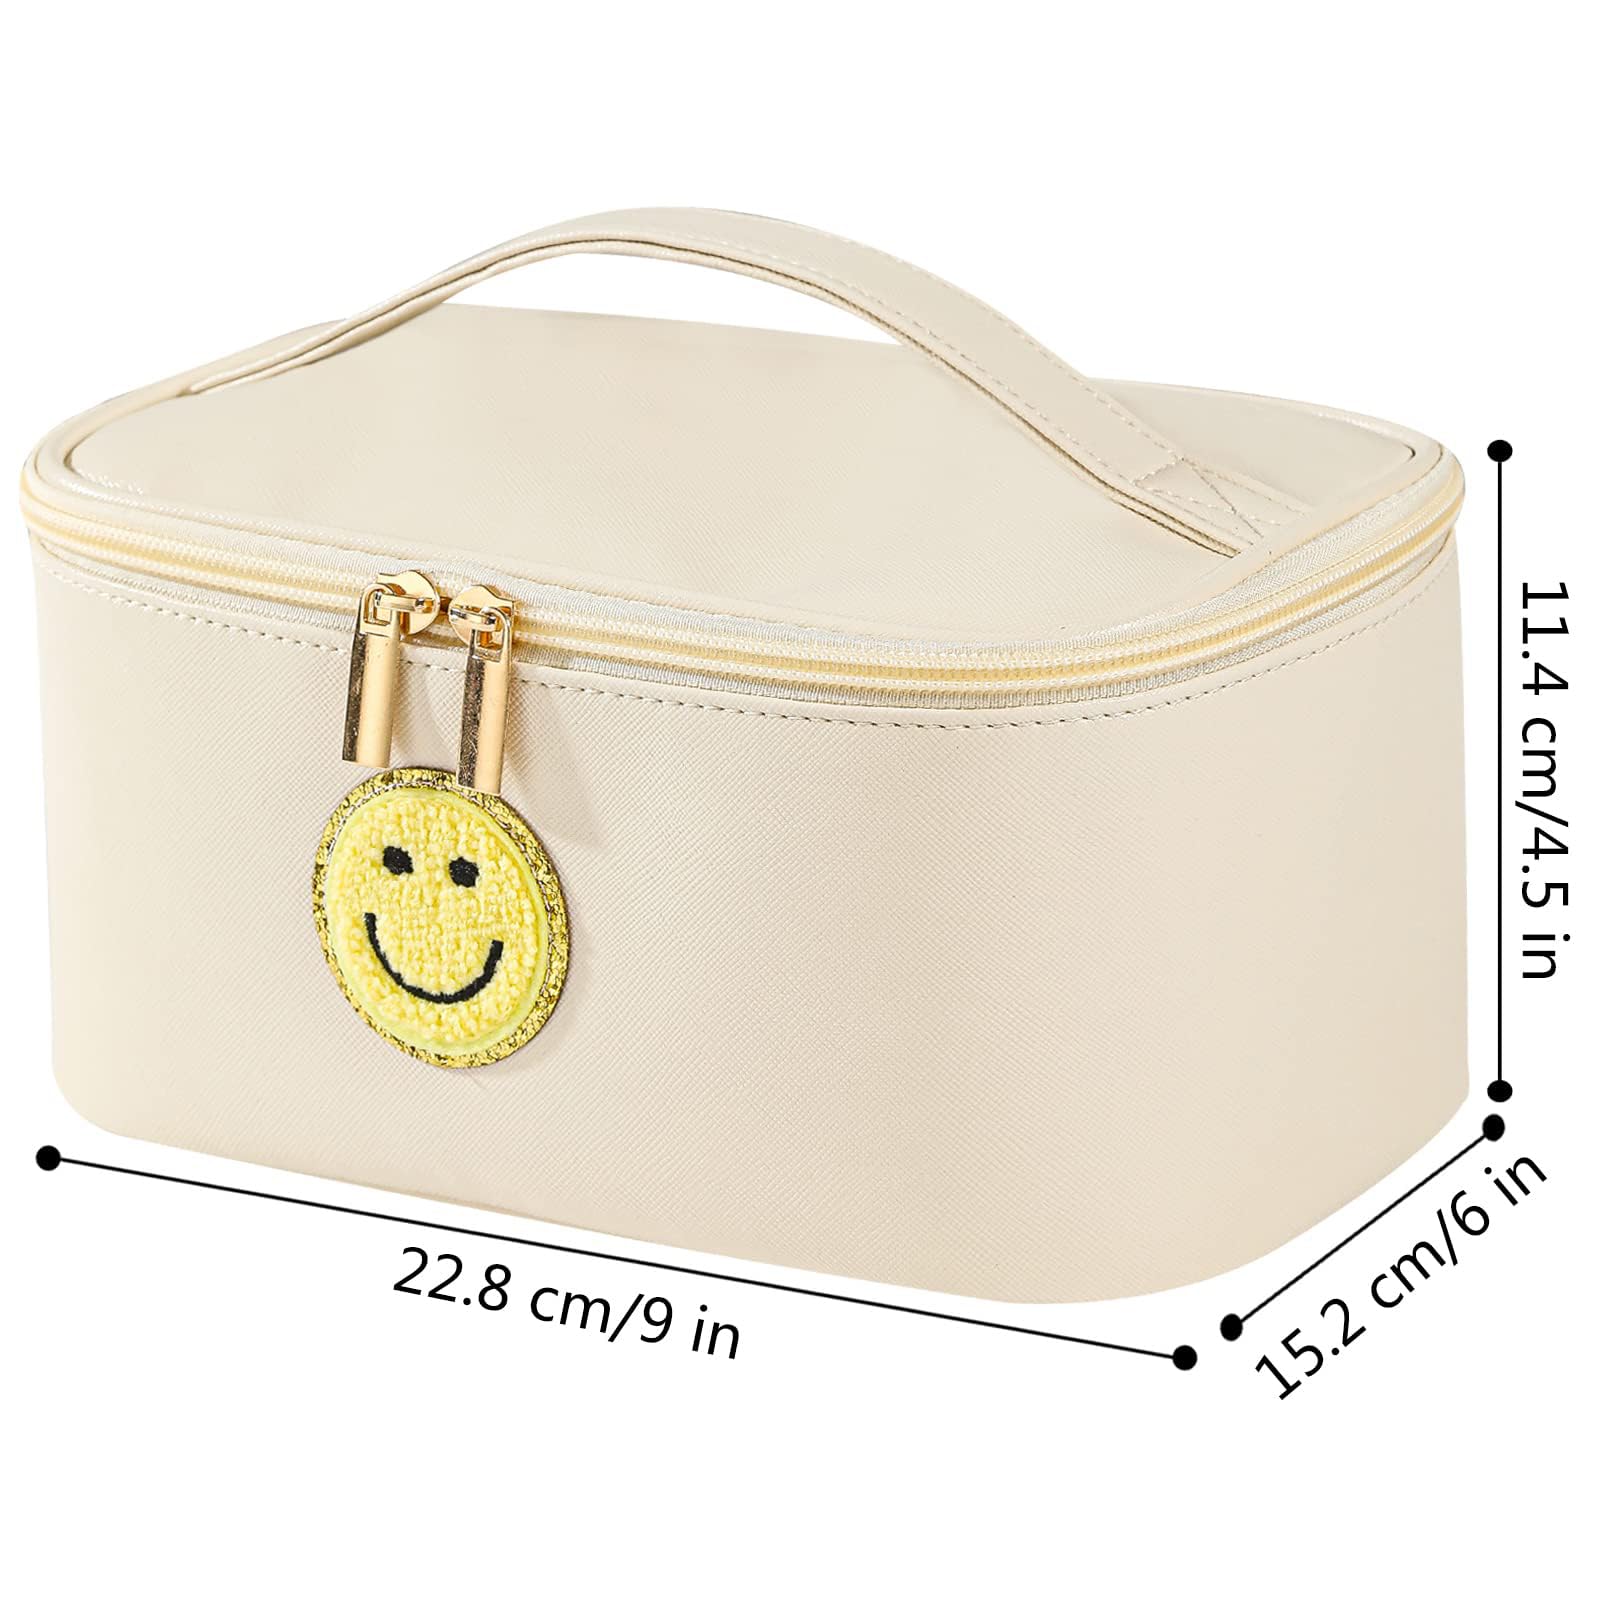 WALONER Preppy Patch Makeup Bag Leather Cosmetic Bag Large Makeup Pouch, Portable Waterproof Travel Toiletry Organizer,Toiletry Bag for Women Girls Gifts (White)